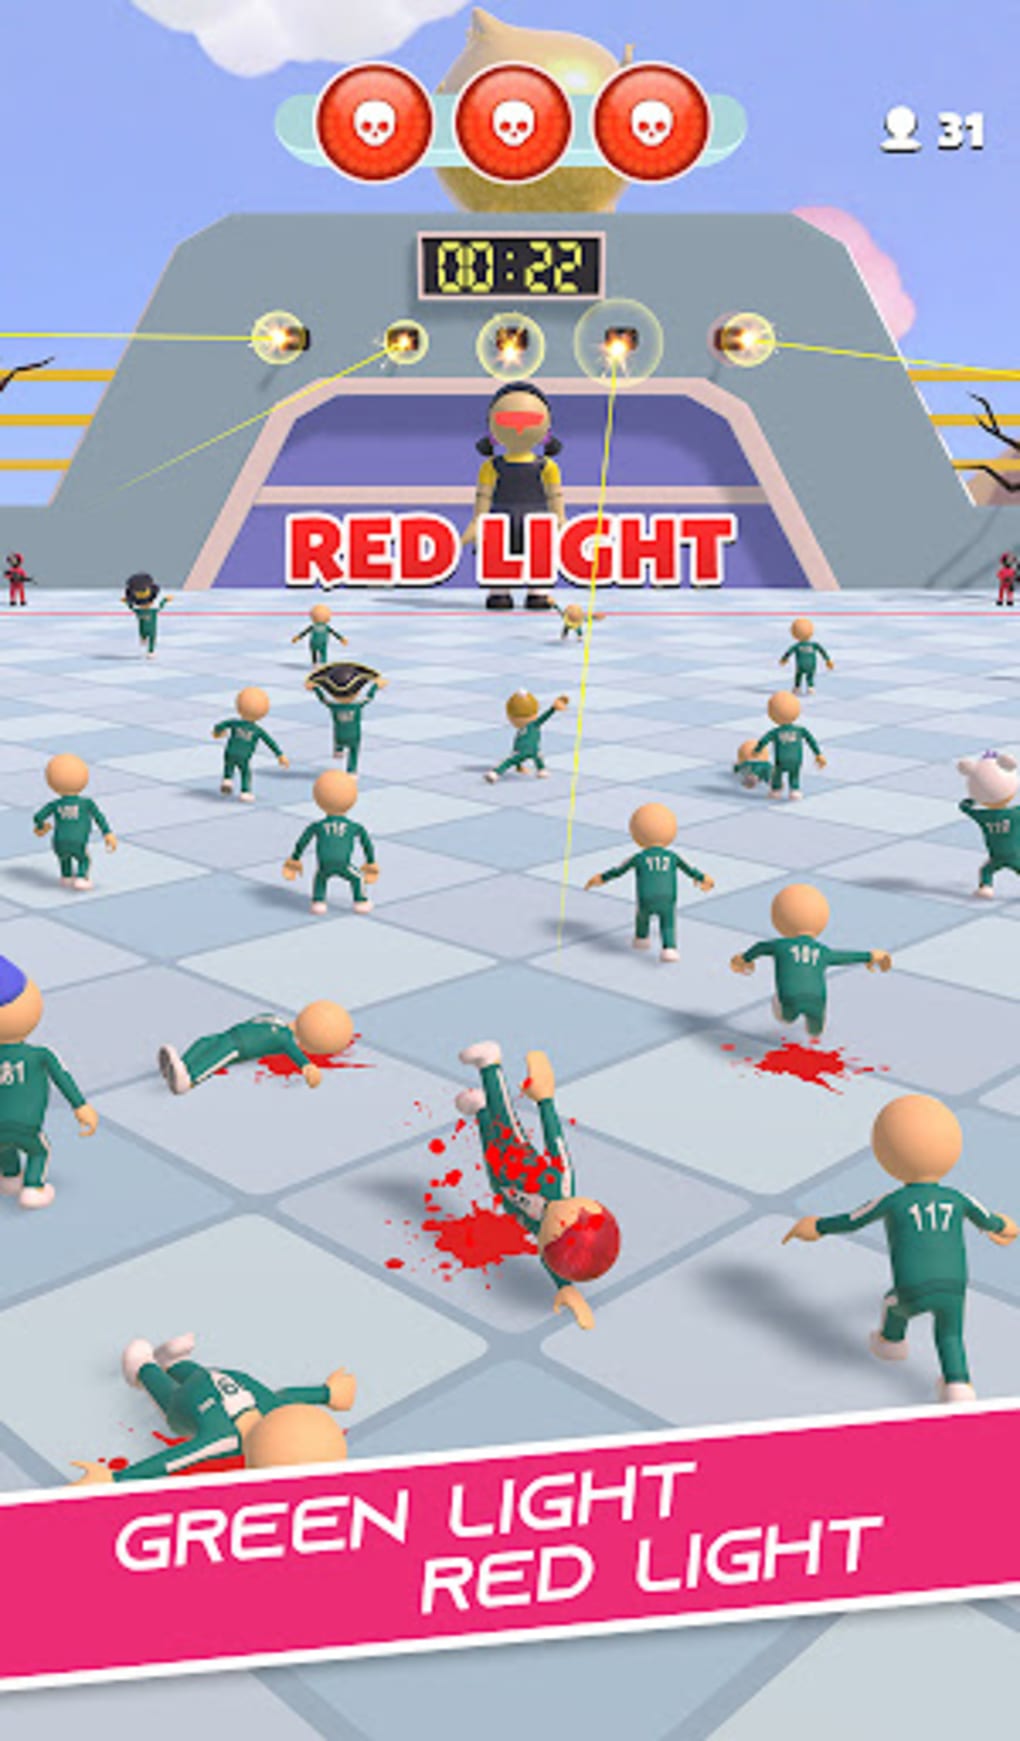 Download Player 456 Squid Game Red Light Green Light Background